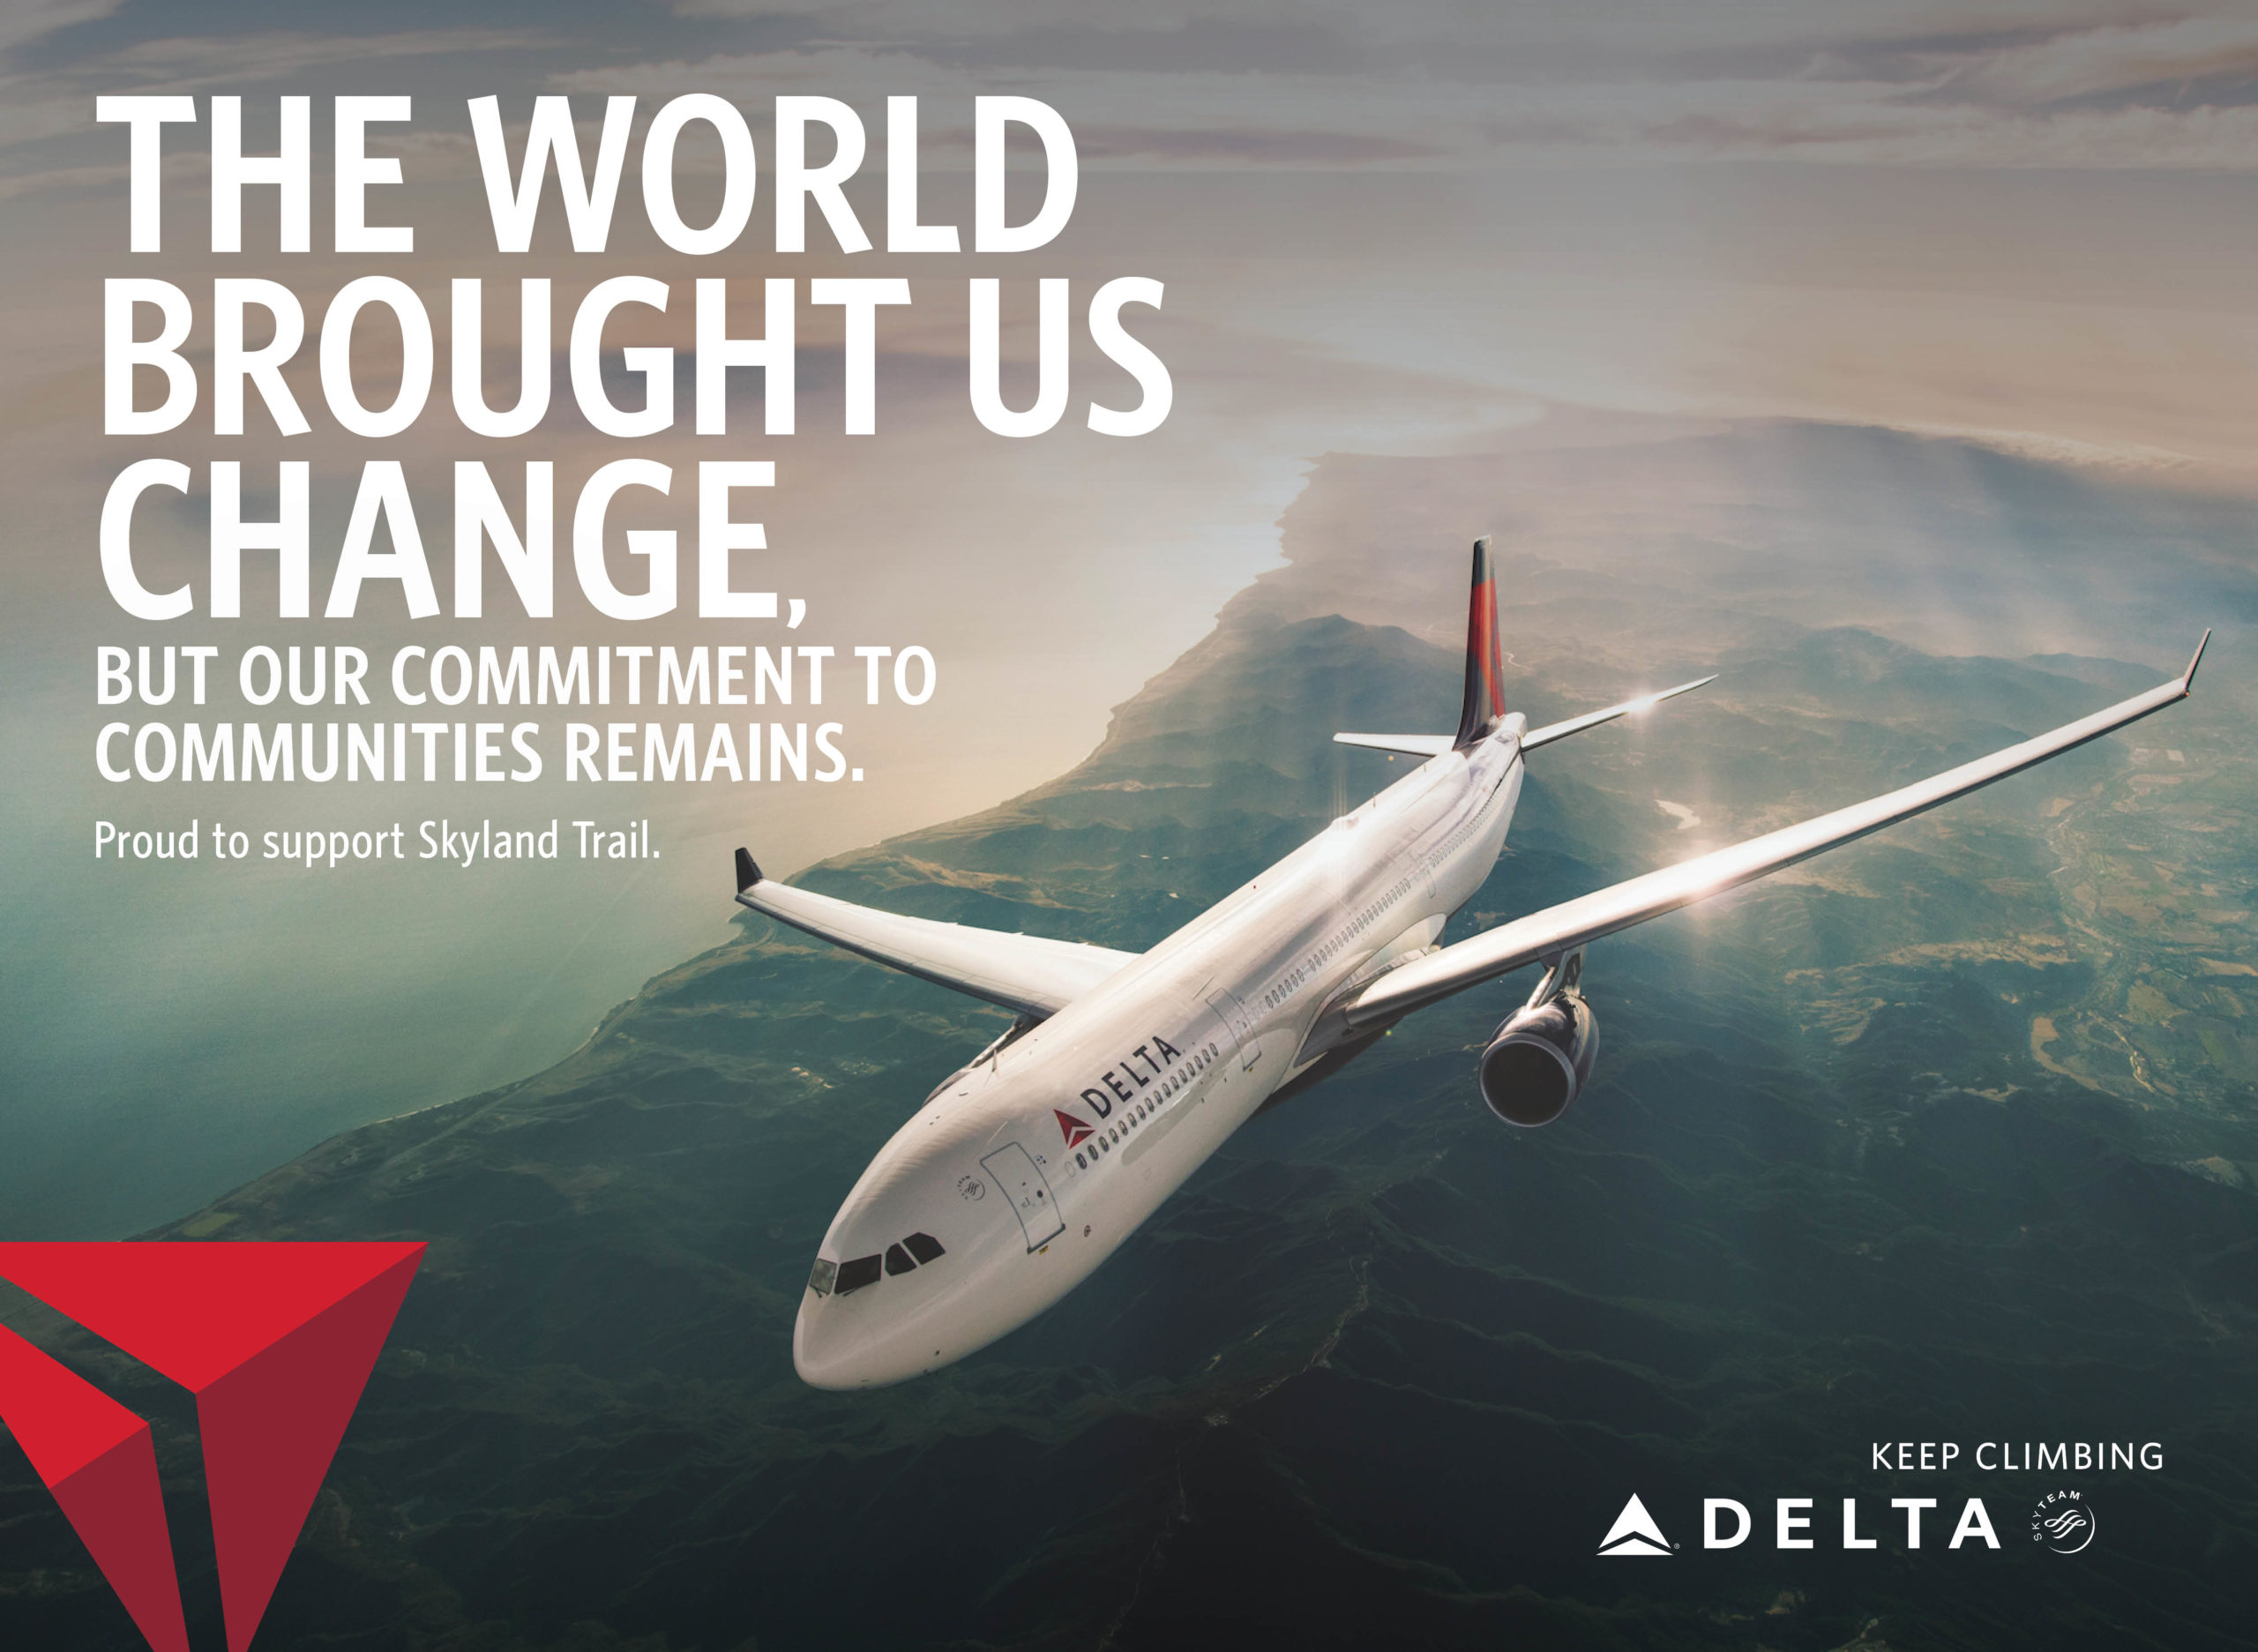 Delta: The World Brought us Change but our committment to communities remains.